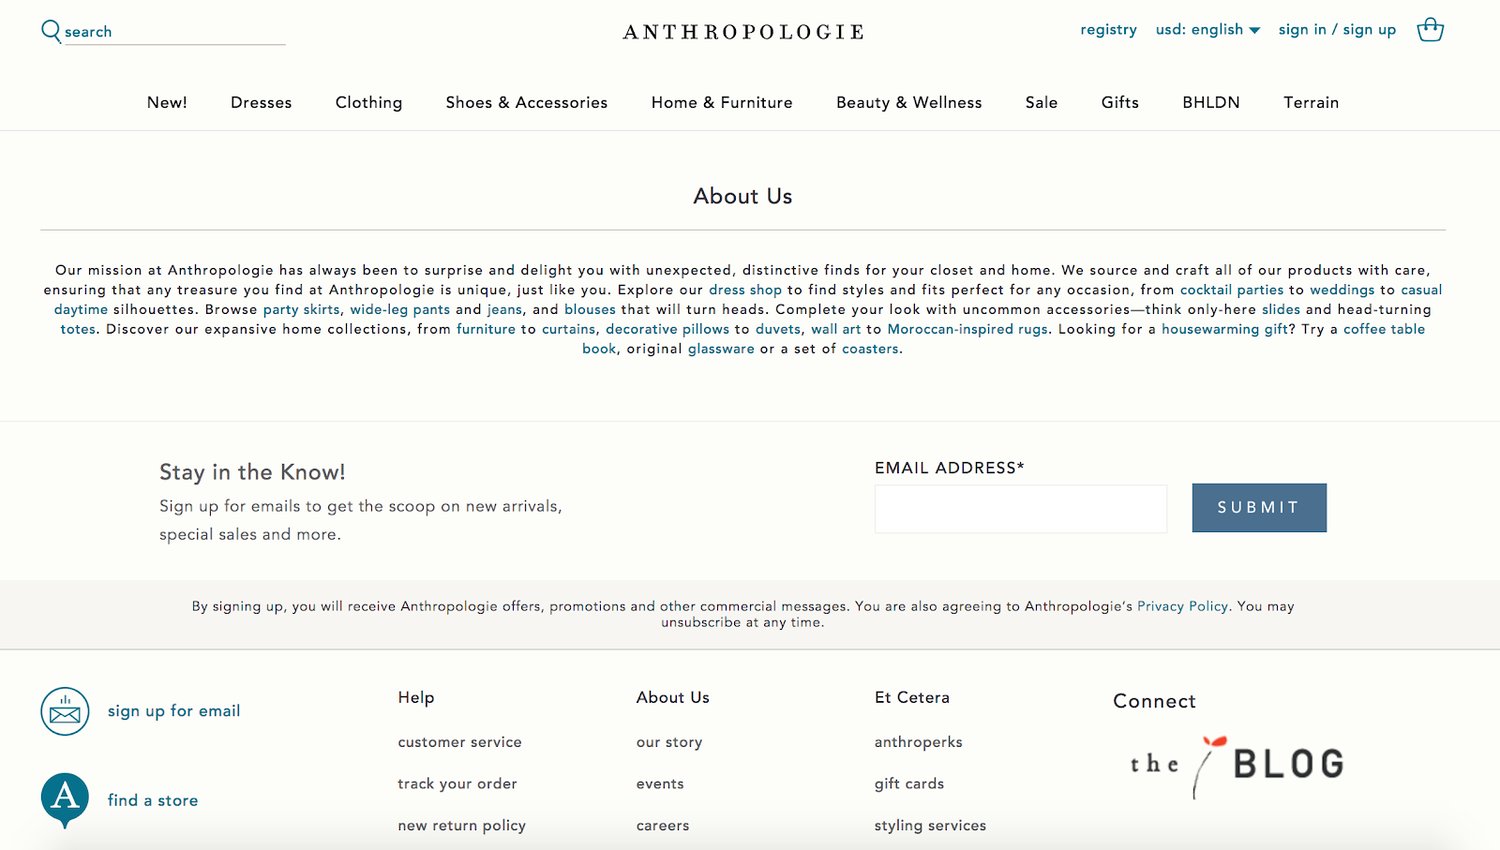 anthropologie homepage with signup form at the bottom of the page above the footer